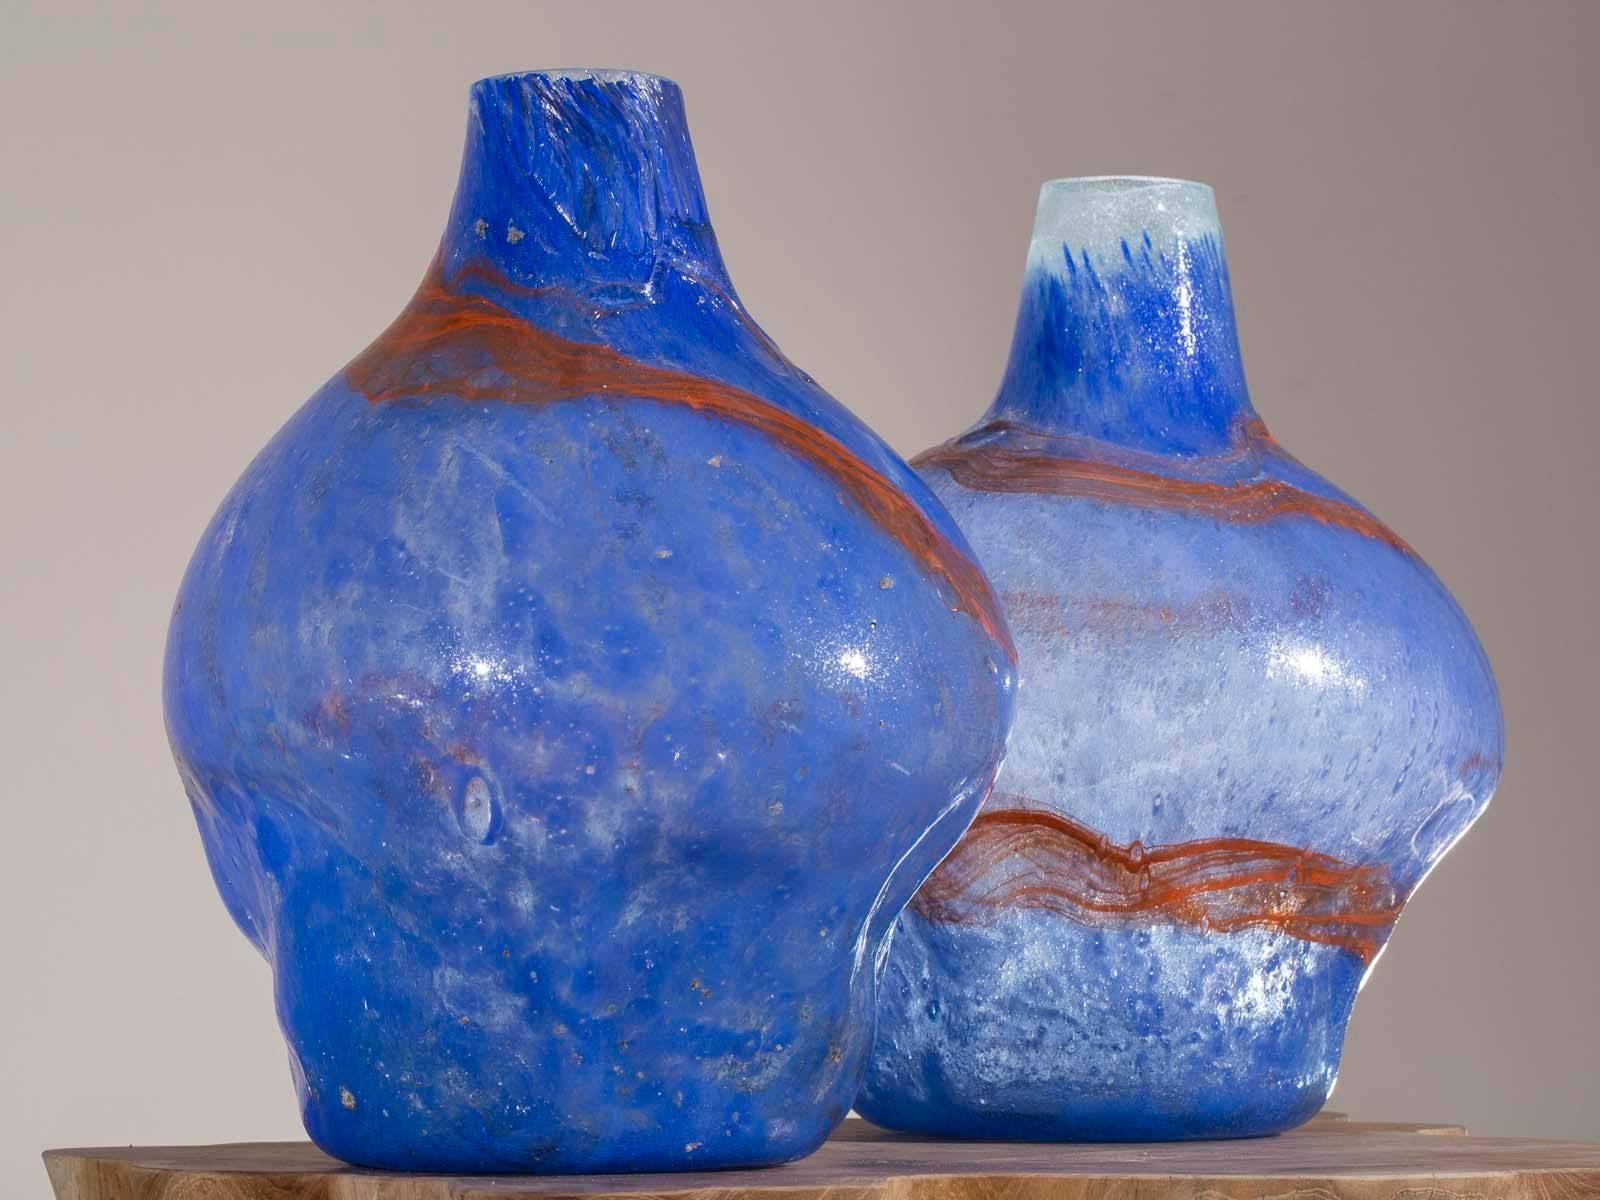 A pair of modern handblown glass vases with blue and orange decoration from Holland. Because each vase is handblown they have a different shape while being the same height. Please take a moment to enlarge the photographs to see the appealing shape